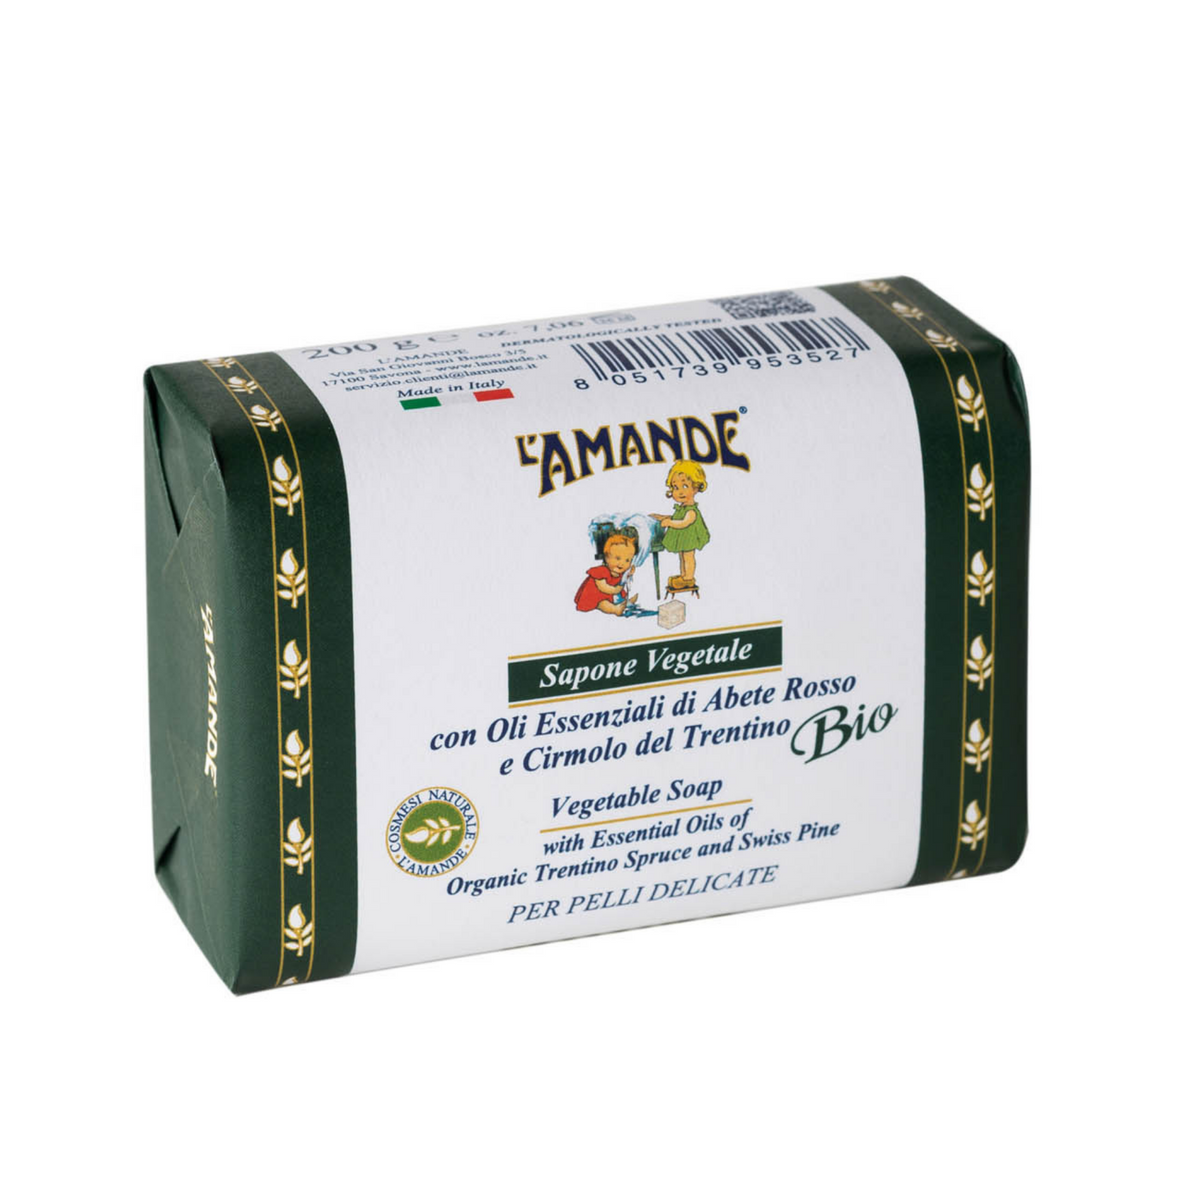 L'amande Trentino Spruce and Swiss Pine Bar Soap (200 g) #10084579